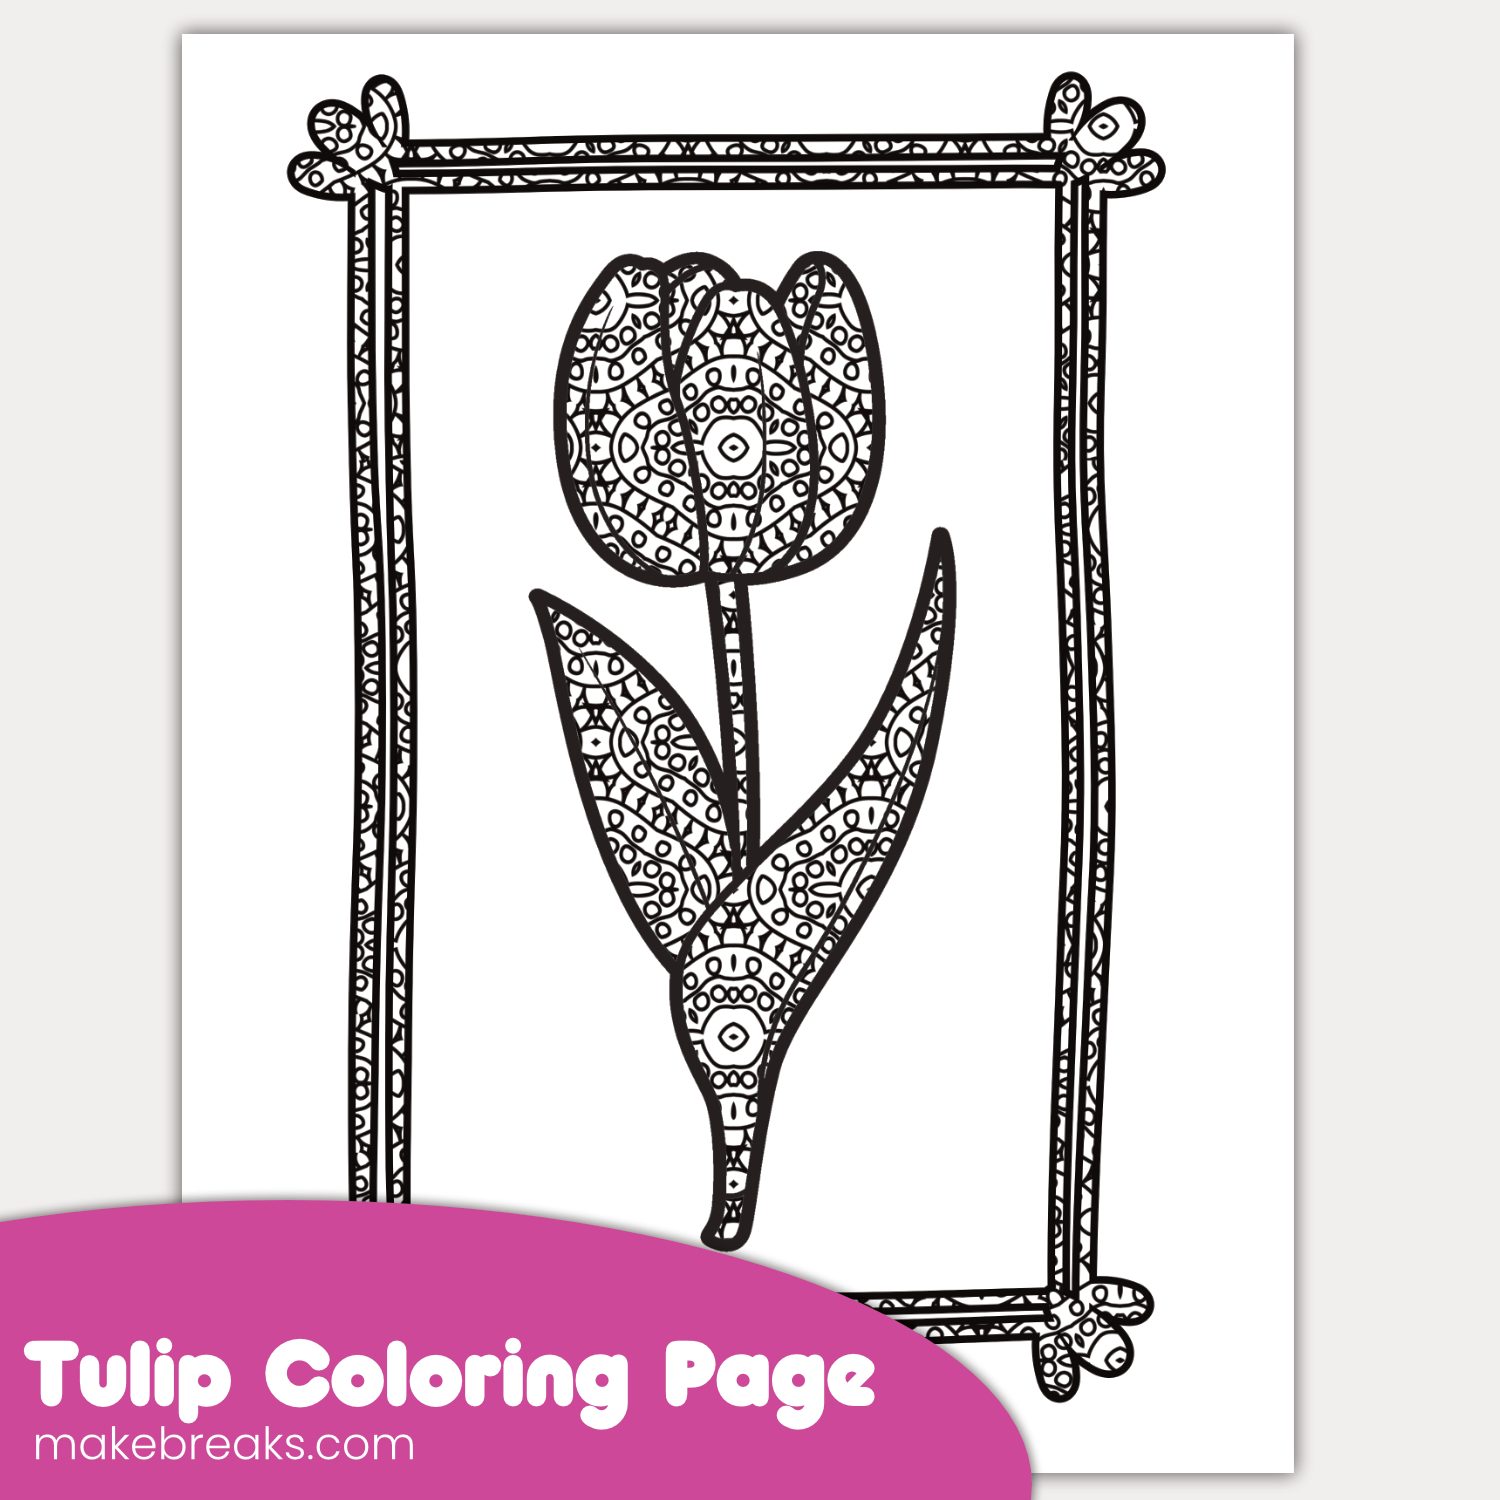 Free Printable Tulip Coloring Page